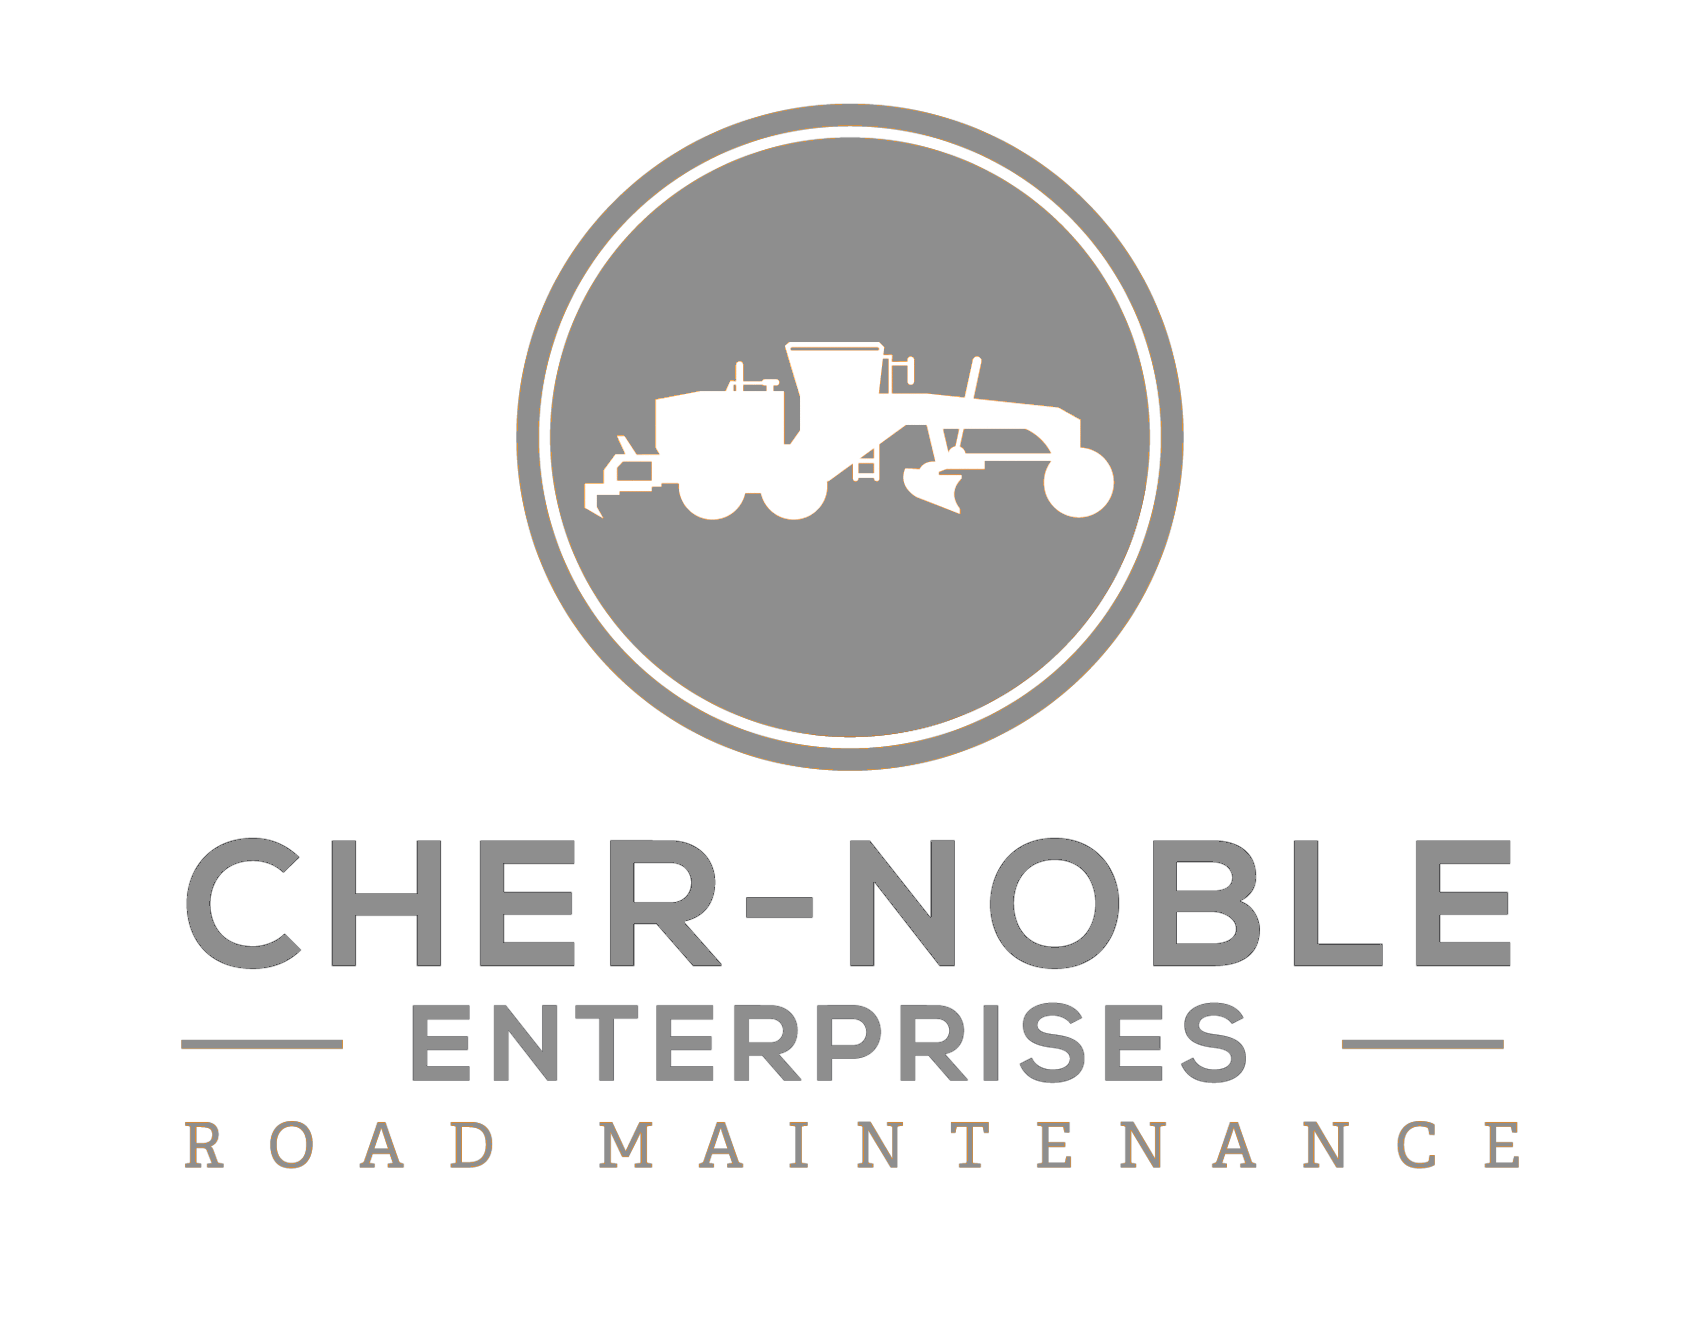 Cher-Noble Enterprises is a full-service road maintenance and grading services business based out of Hinton, AB and servicing the the Yellowhead County